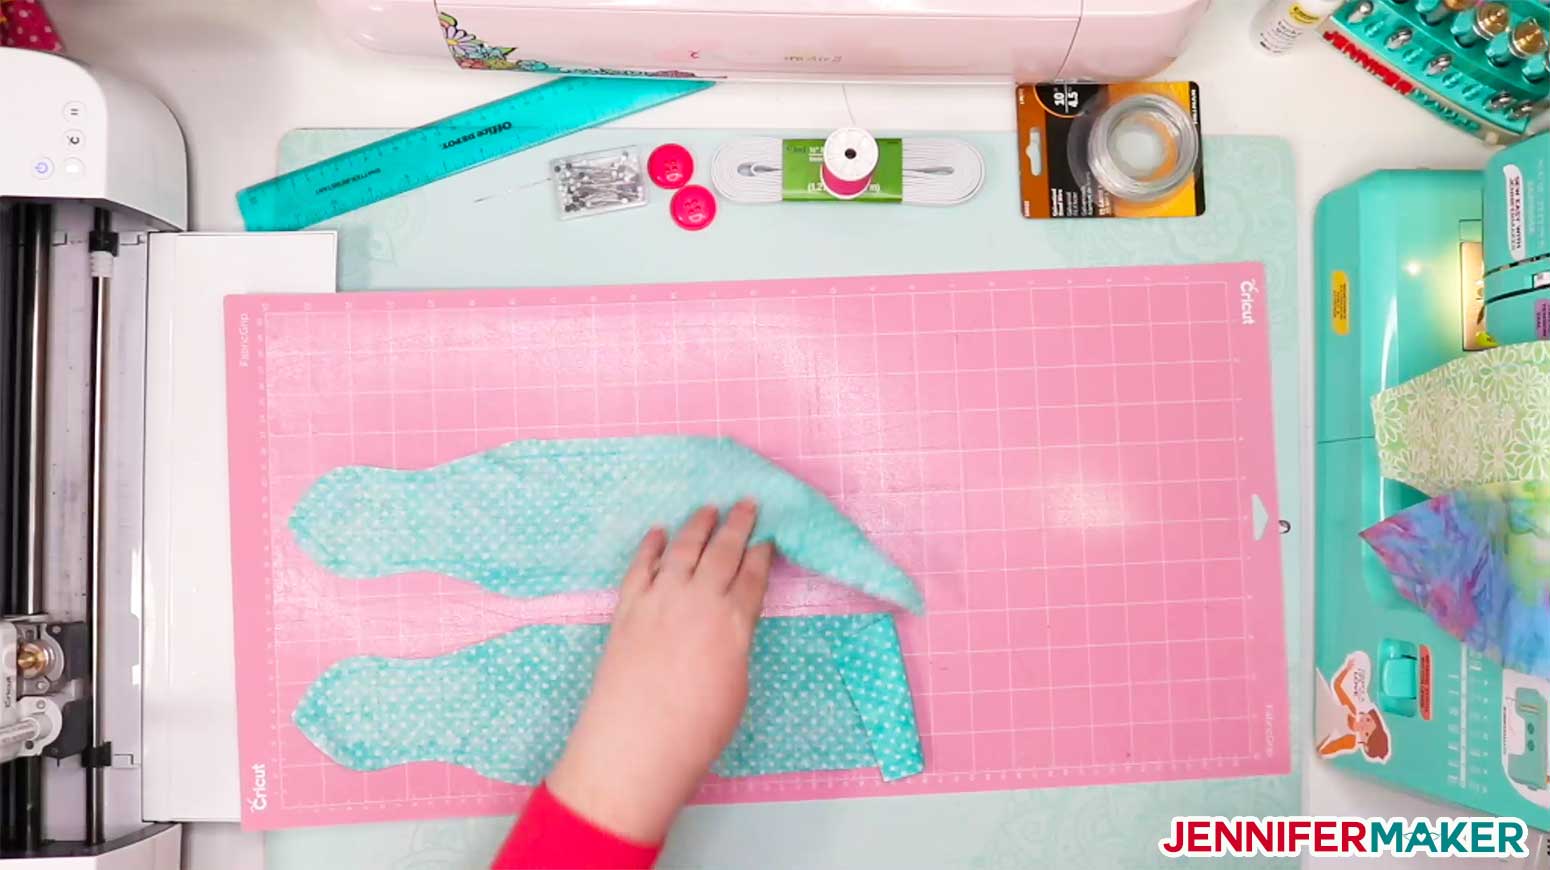 Removing the cut fabric from the pink FabricGrip mat to make DIY headbands with buttons for face masks